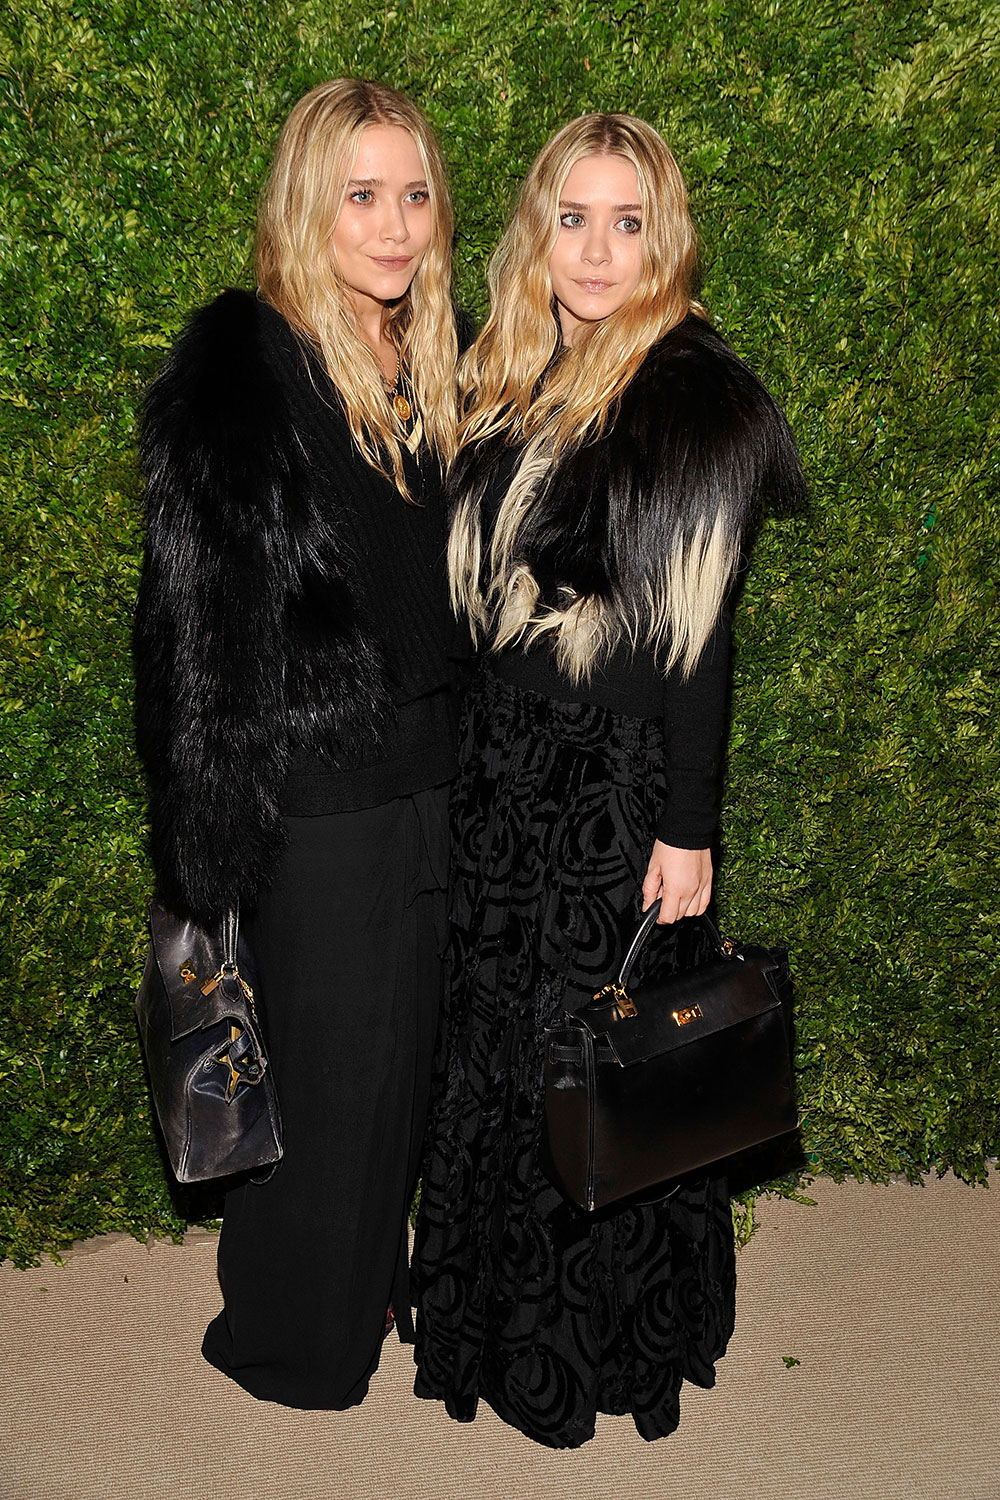 Mary-Kate and Ashley Olsen at the 7th Annual CFDA/Vogue Fashion Fund Awardsin 2010